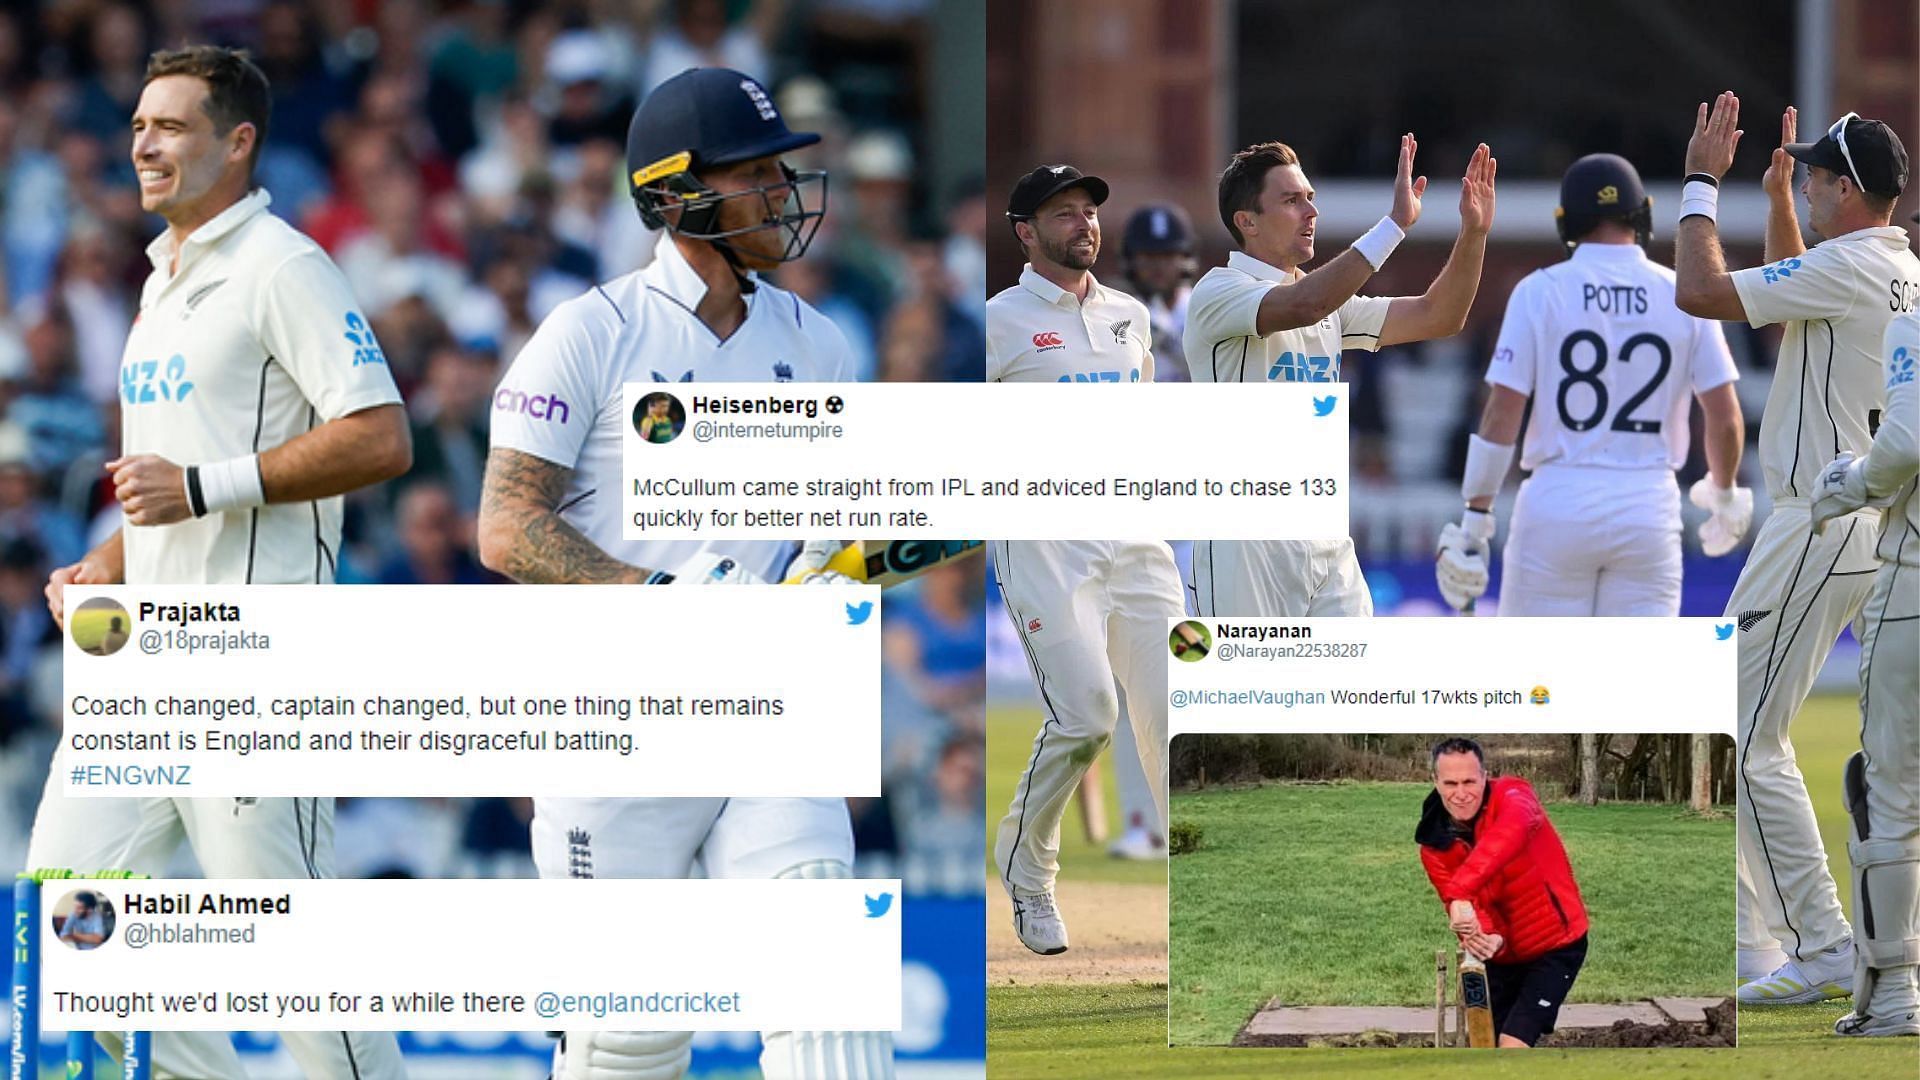 Fans trolled Ben Stokes and Co. for losing 7 wickets for just 41 runs.